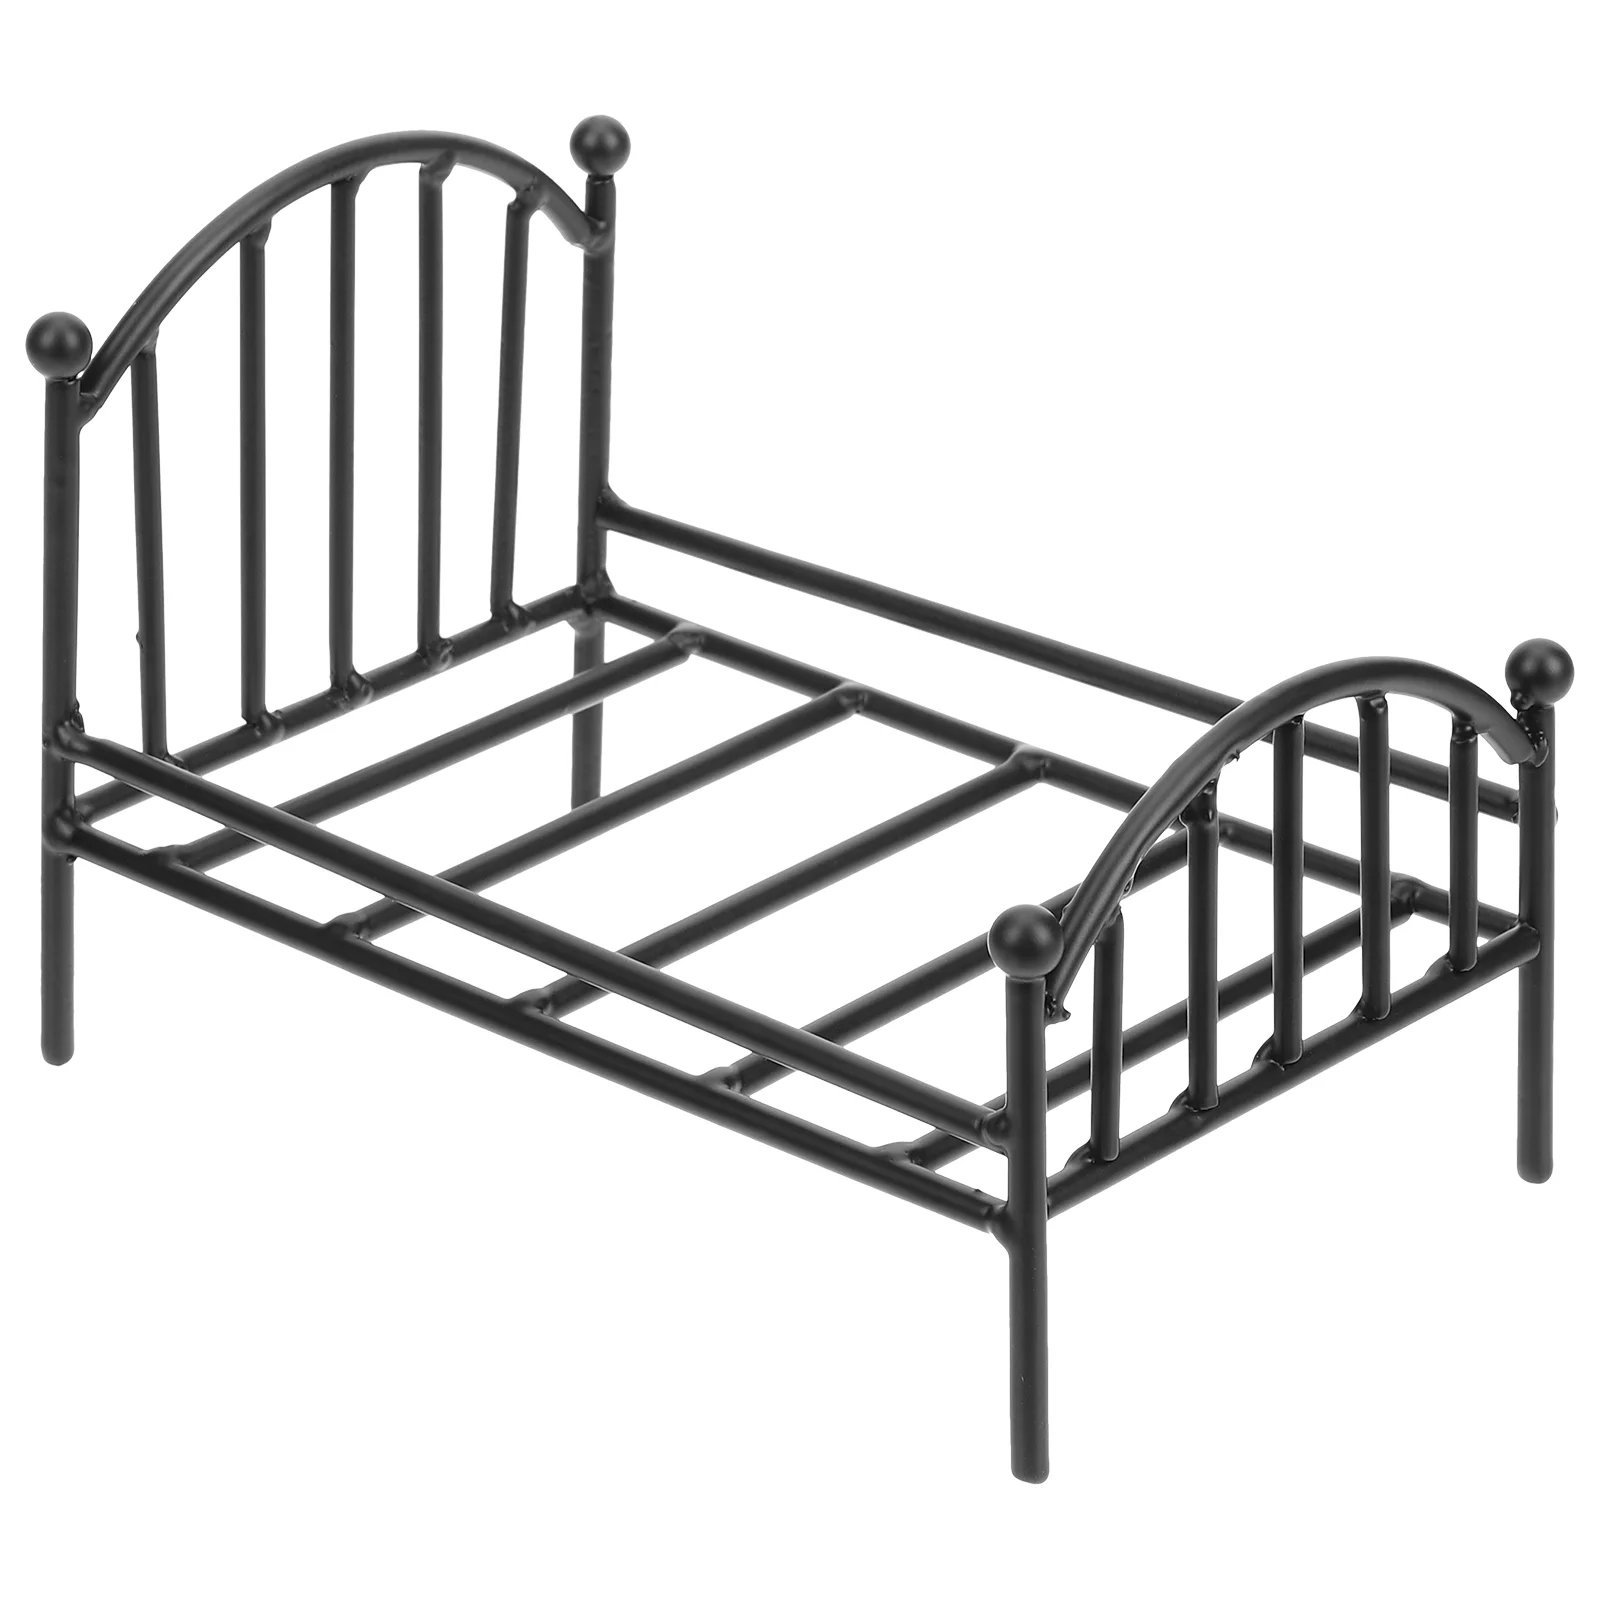 

Wrought Iron Potting Stand Retro Home Decor Mini House Decoration Bed Plant Accessories Child Tiny Metal Frame Bases frames